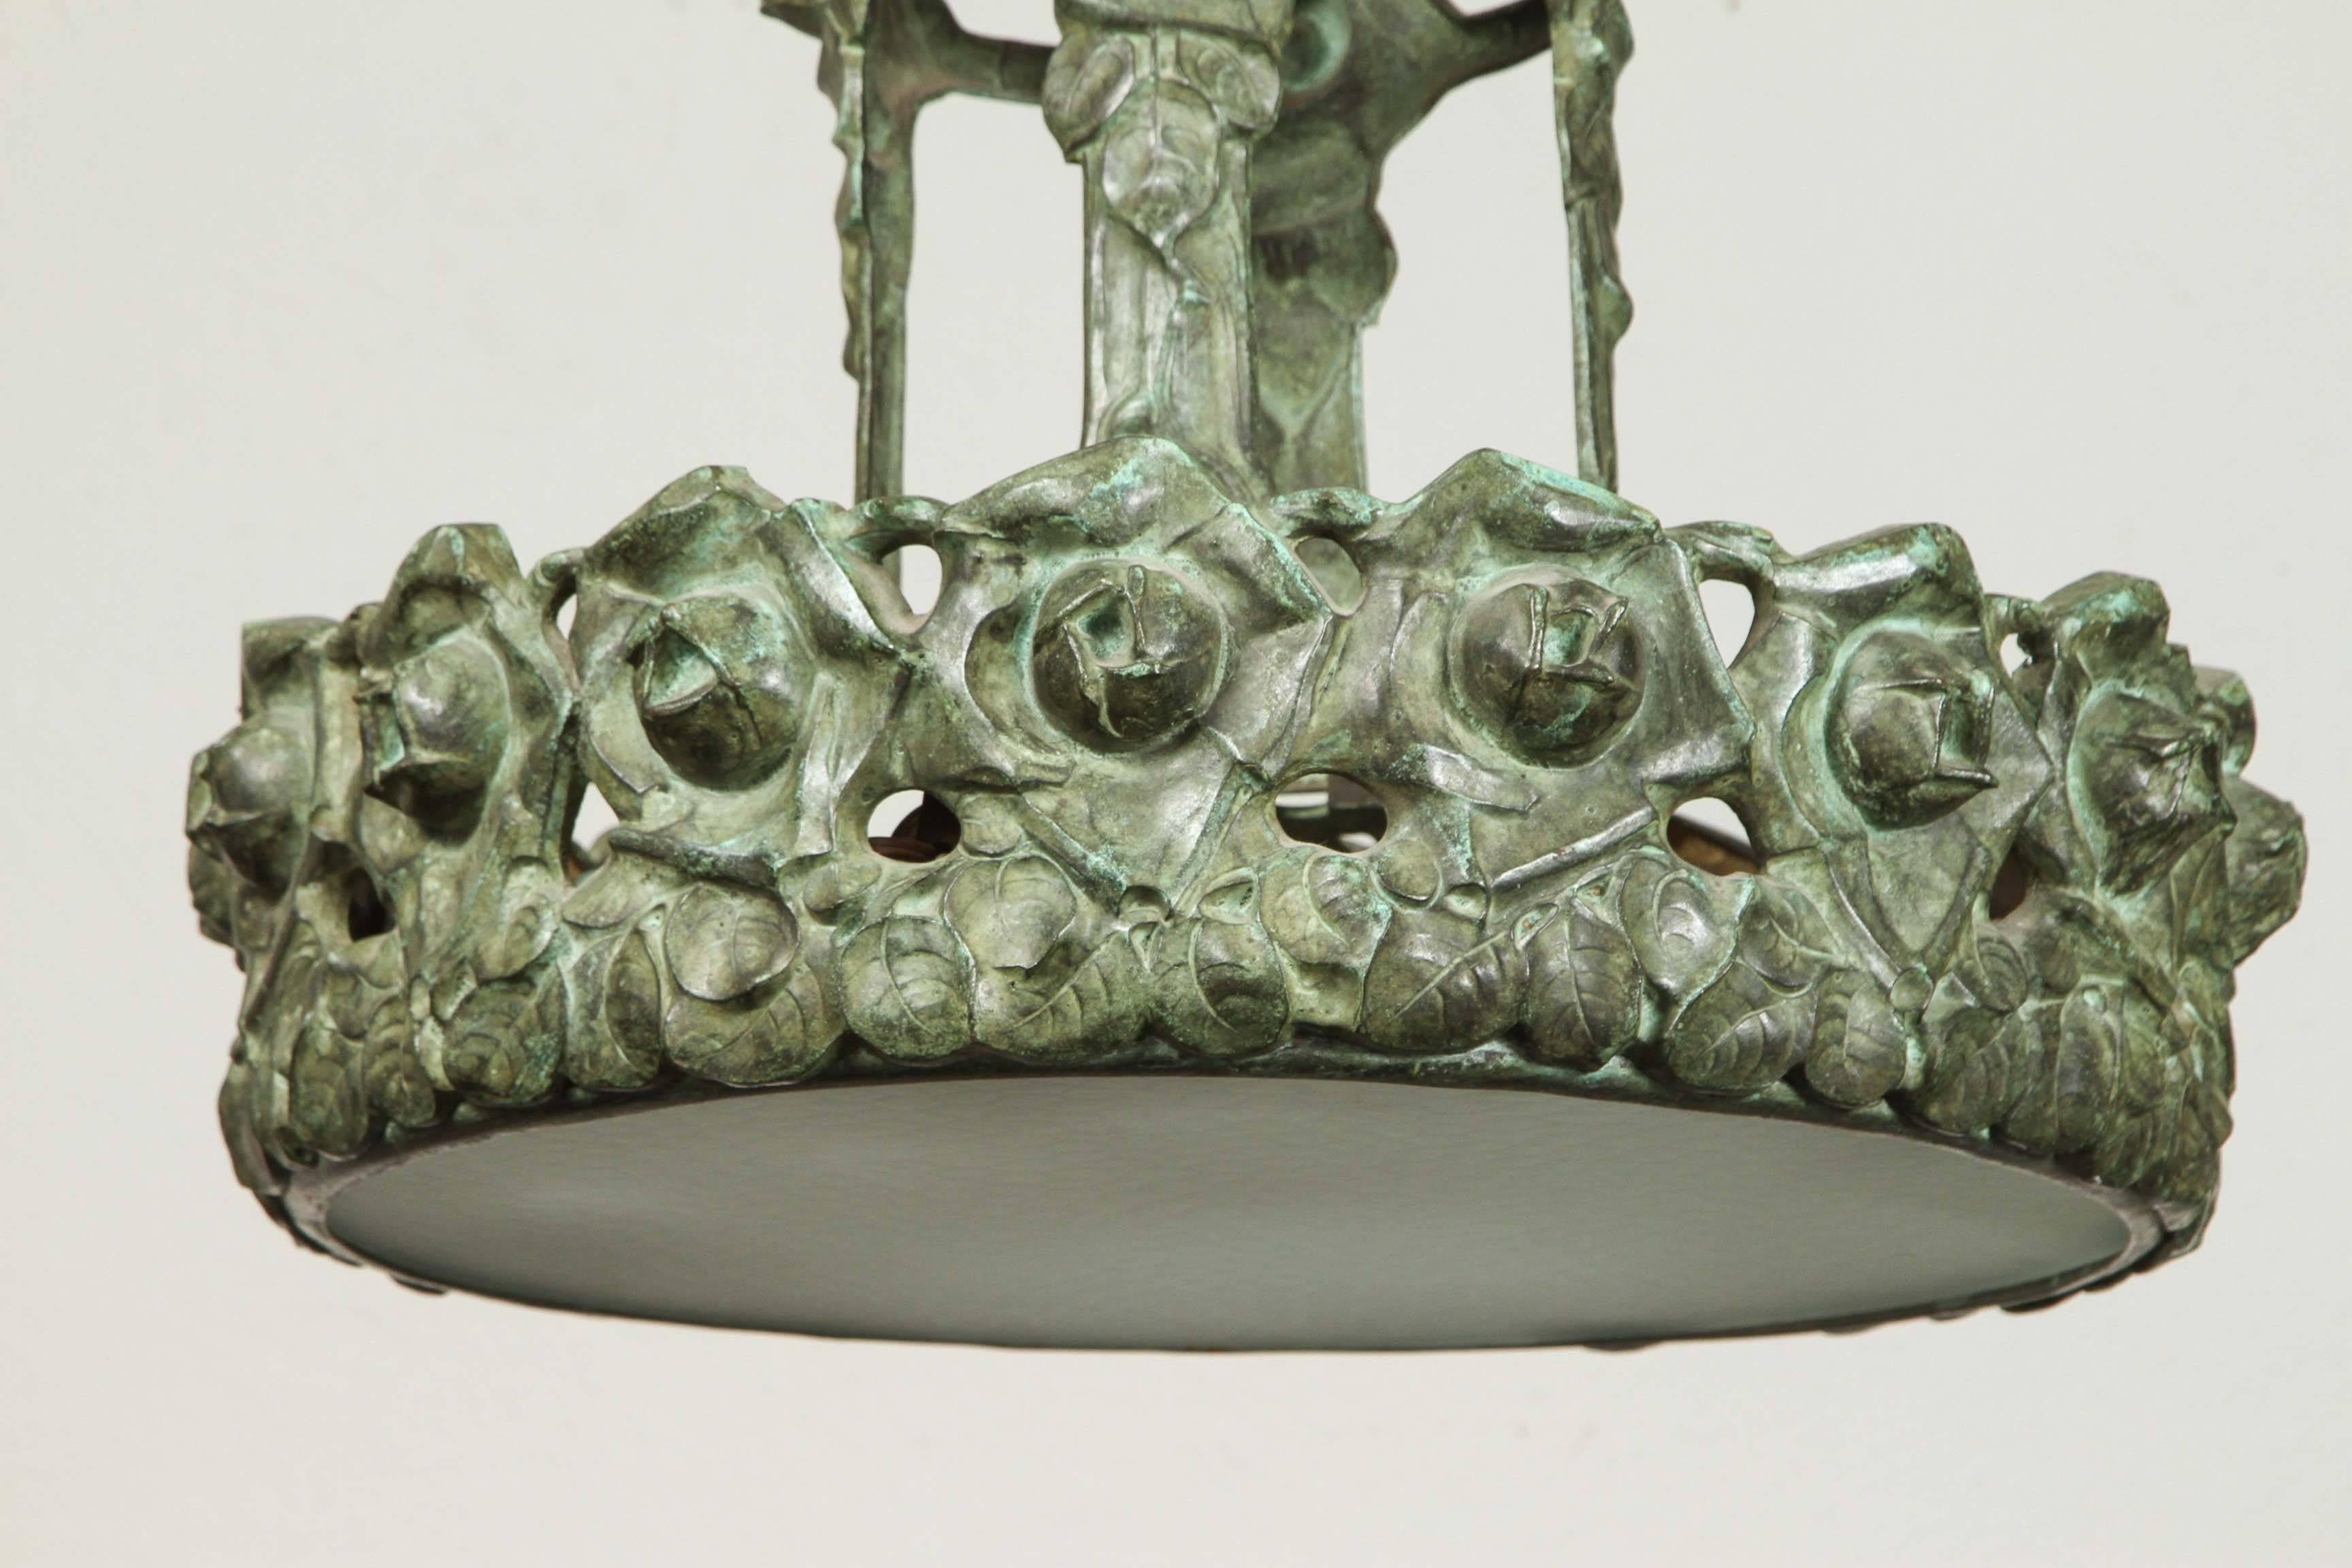 Hand-cast bronze and frosted glass, French chandelier featuring a circlet of roses and leaves. The whole surmounted by a pierced dome.